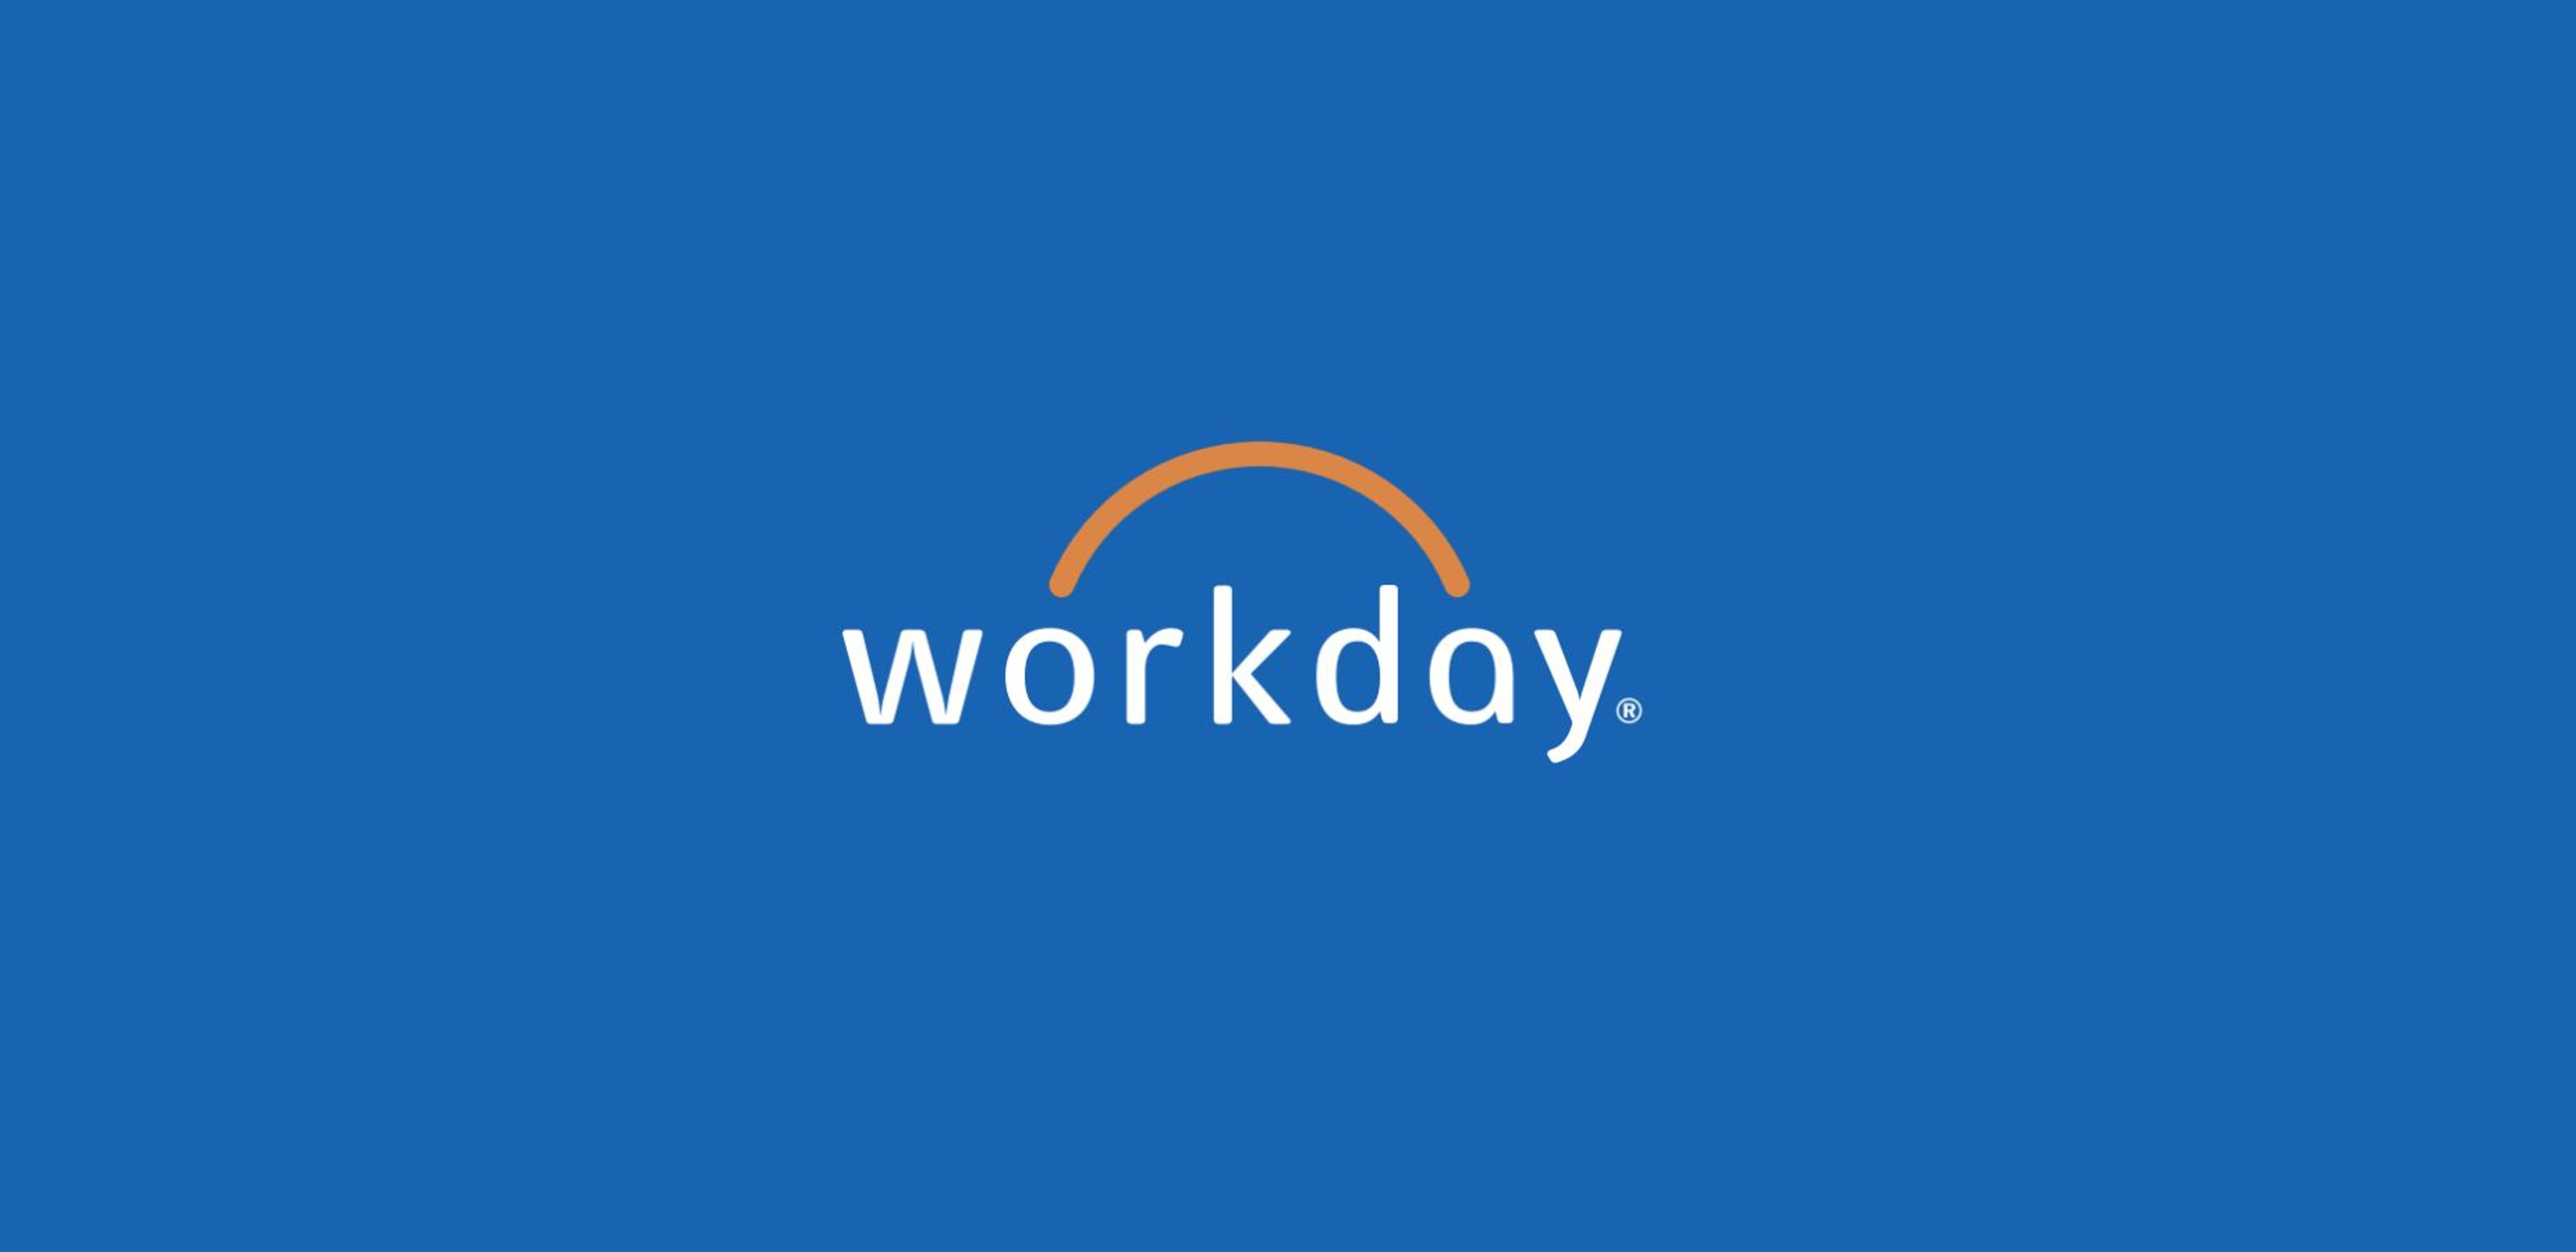 Workday Gets Price Target Hikes By Analysts Following Upbeat Q1 Results, Shares Surge